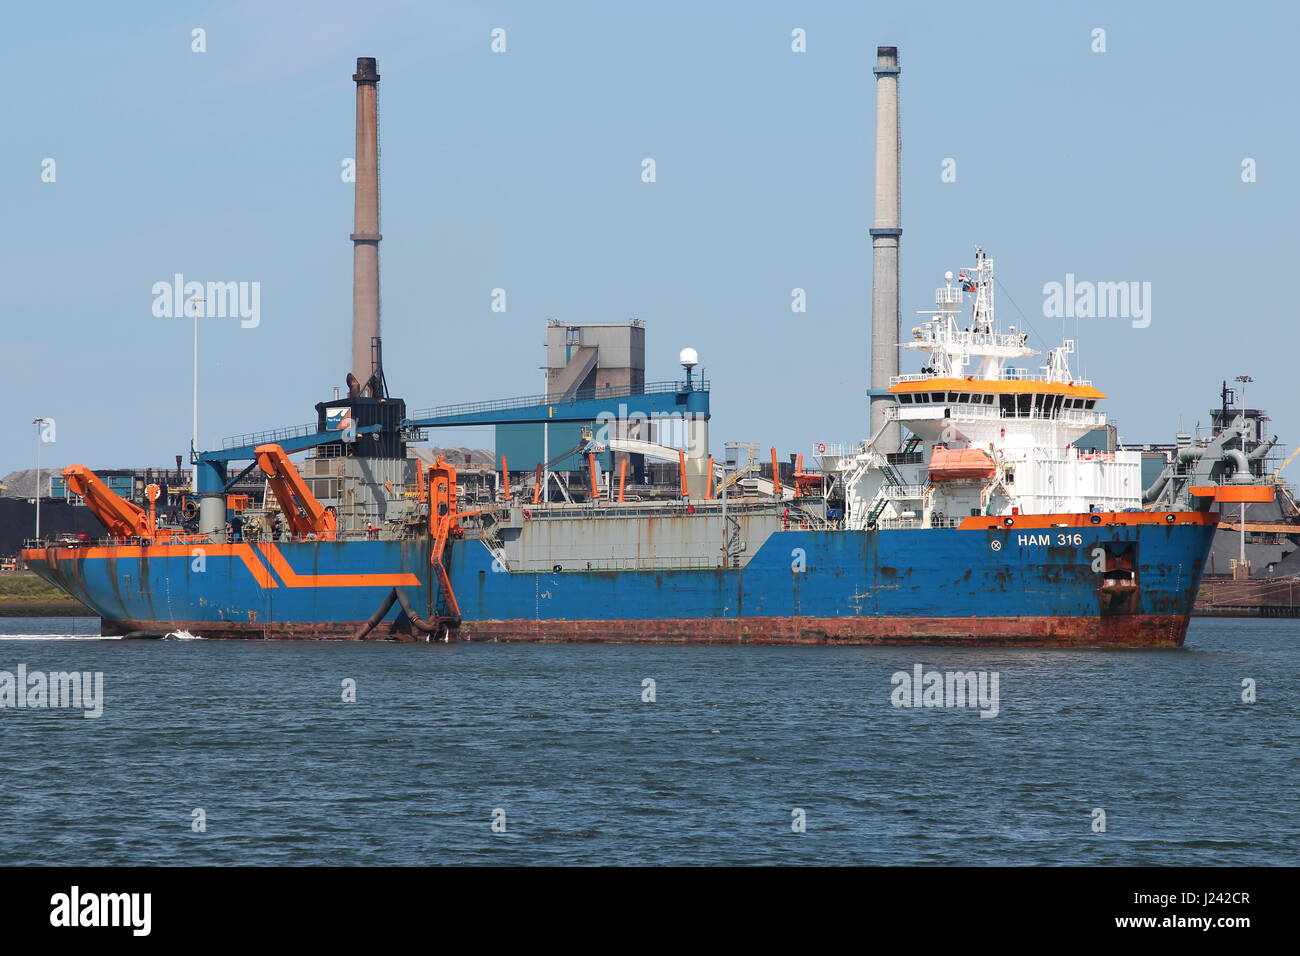 trailing suction hopper dredger HAM 316 operated by Van Oord, a Dutch contracting company with one of the world's largest dredging fleets. Stock Photo